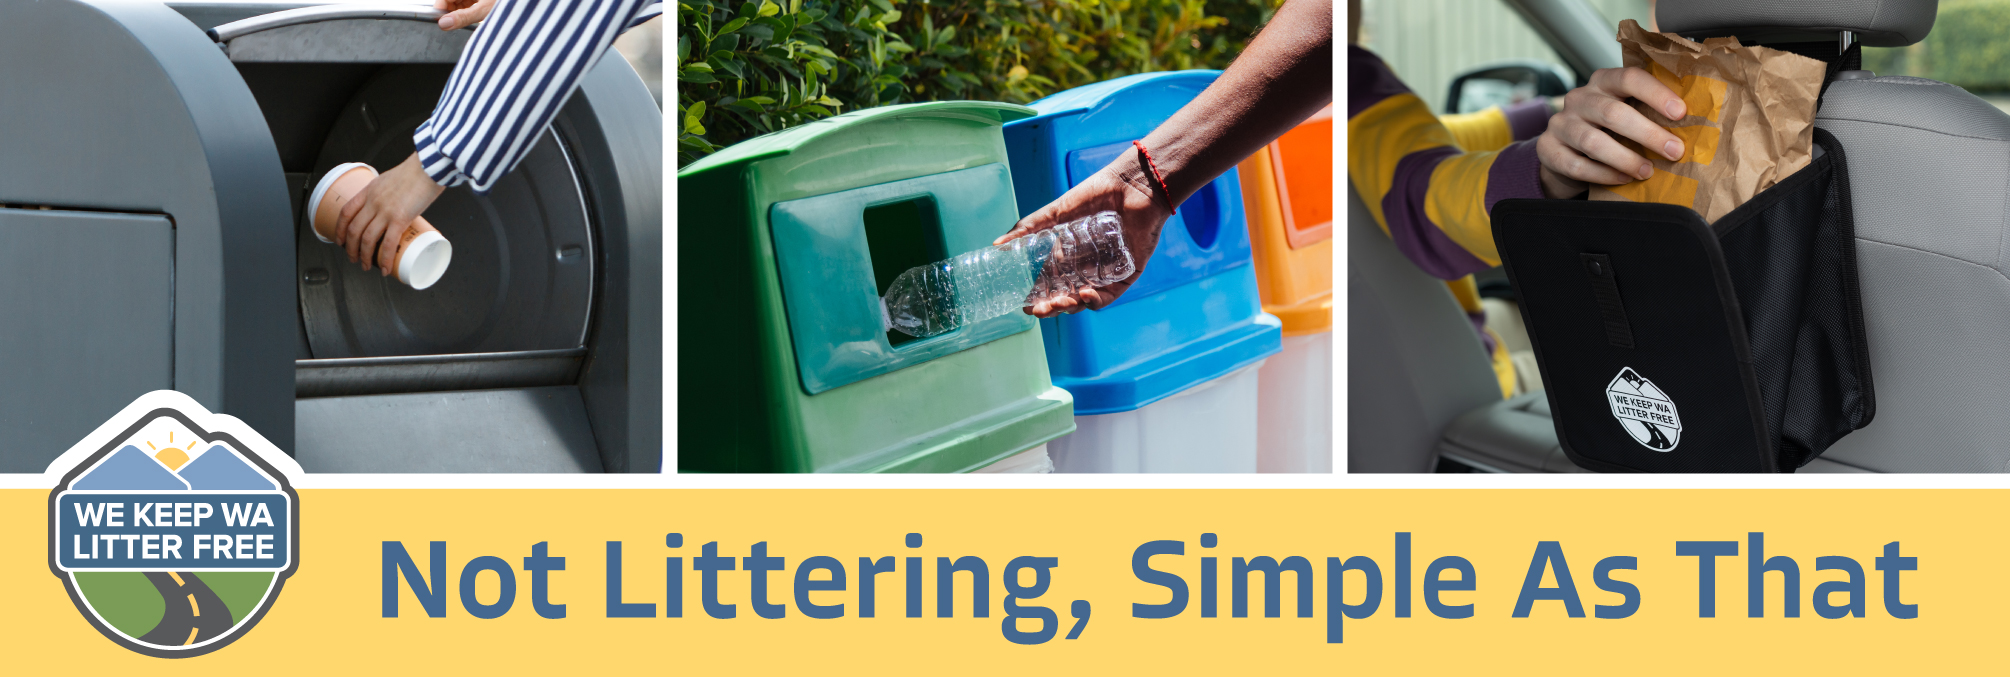 Put litter in its place. A banner image showing people depositing a cup, bottle, and paper bag into correct receptacles, including a vehicle litter bag.